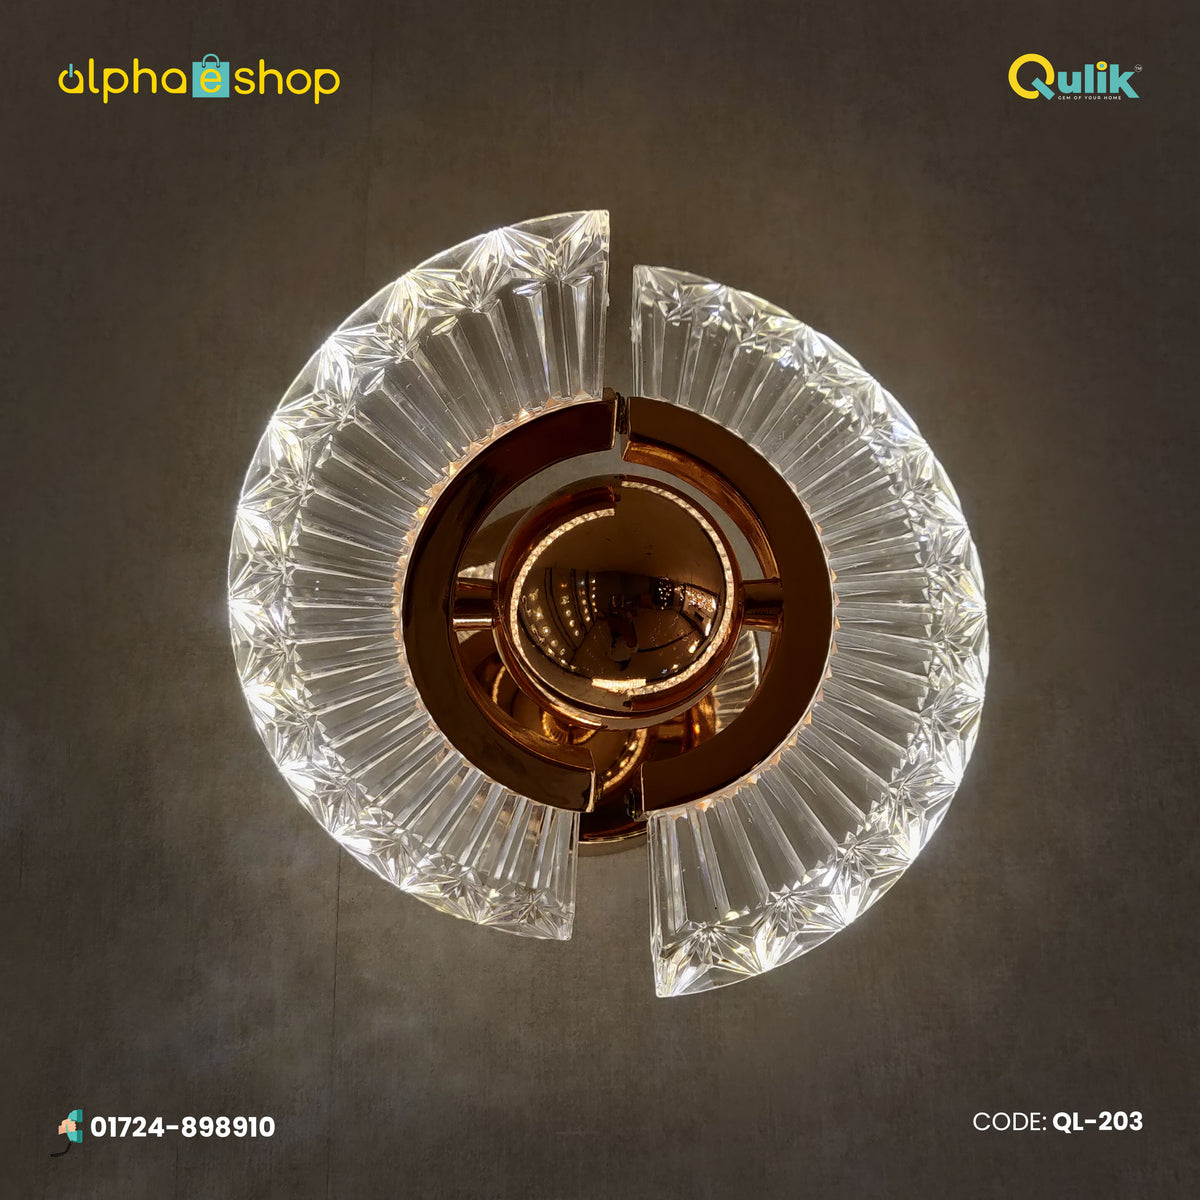 Qulik QL-203 Modern Wall Lamp - Timeless Elegance, Adjustable Lighting, 2-Year Warranty. Elevate your space with sophistication and enduring style.